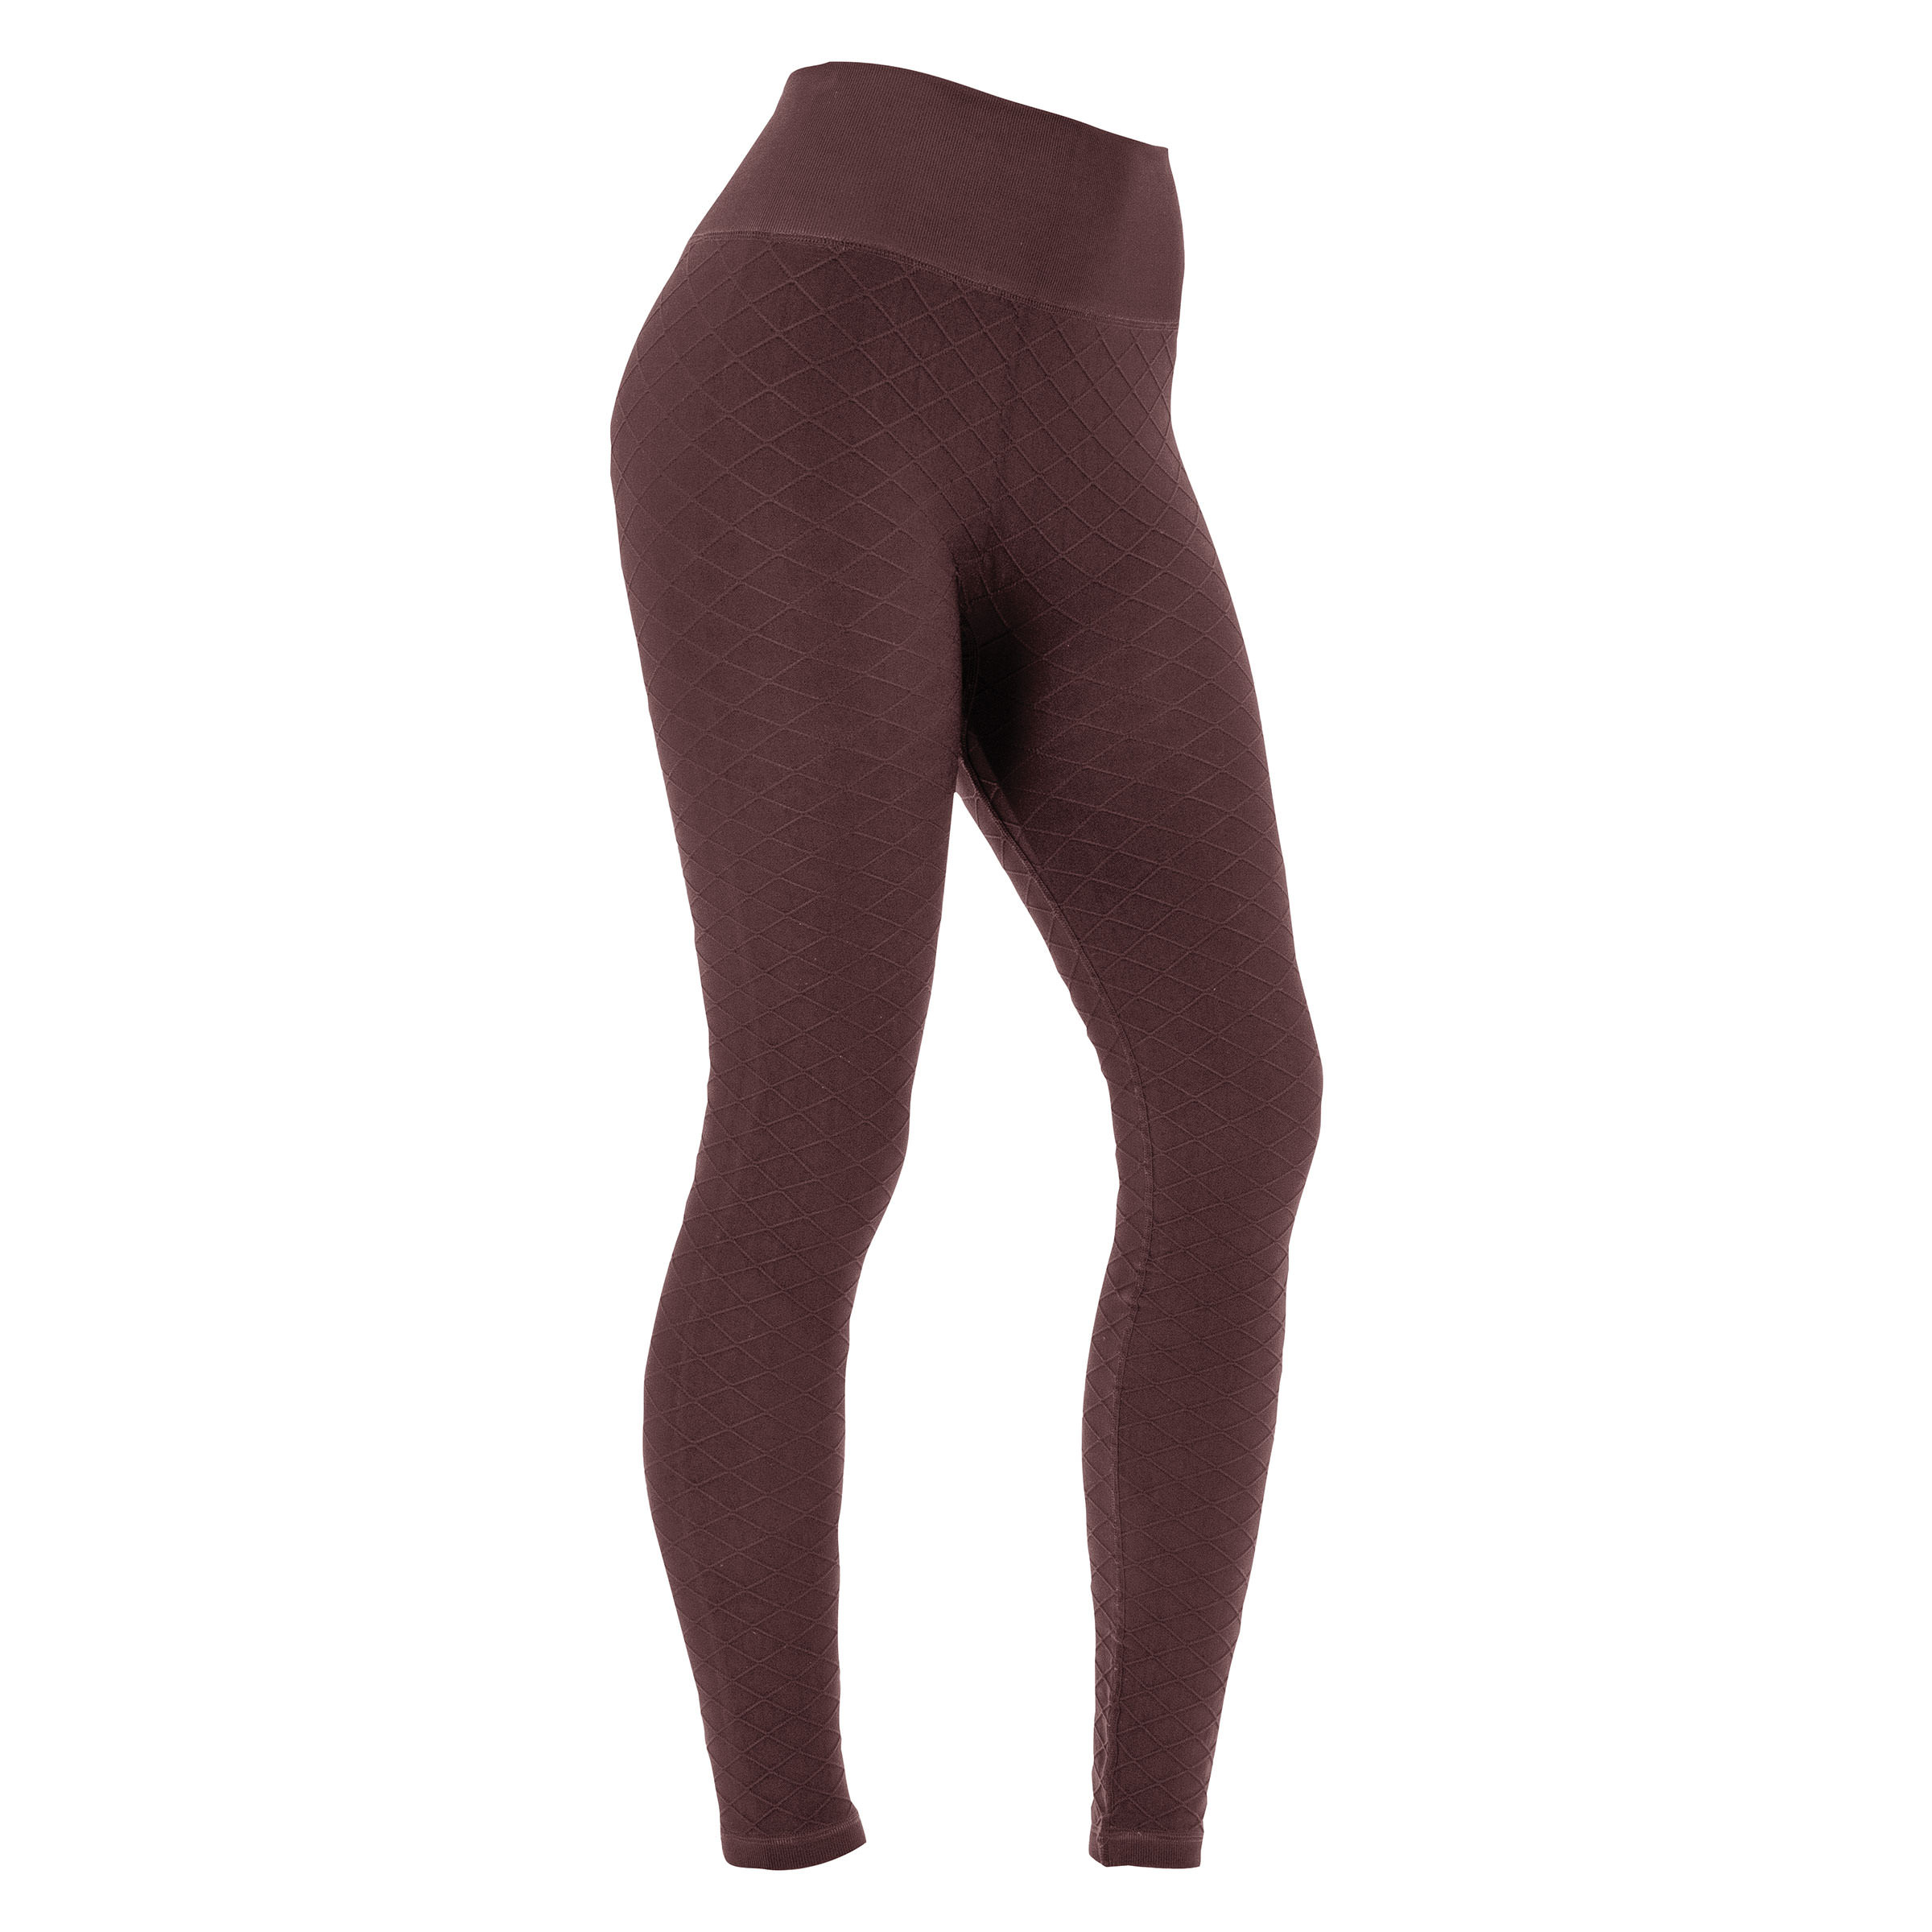 Black Trouser with Pocket Dark Brown Footless Tights Gifts for